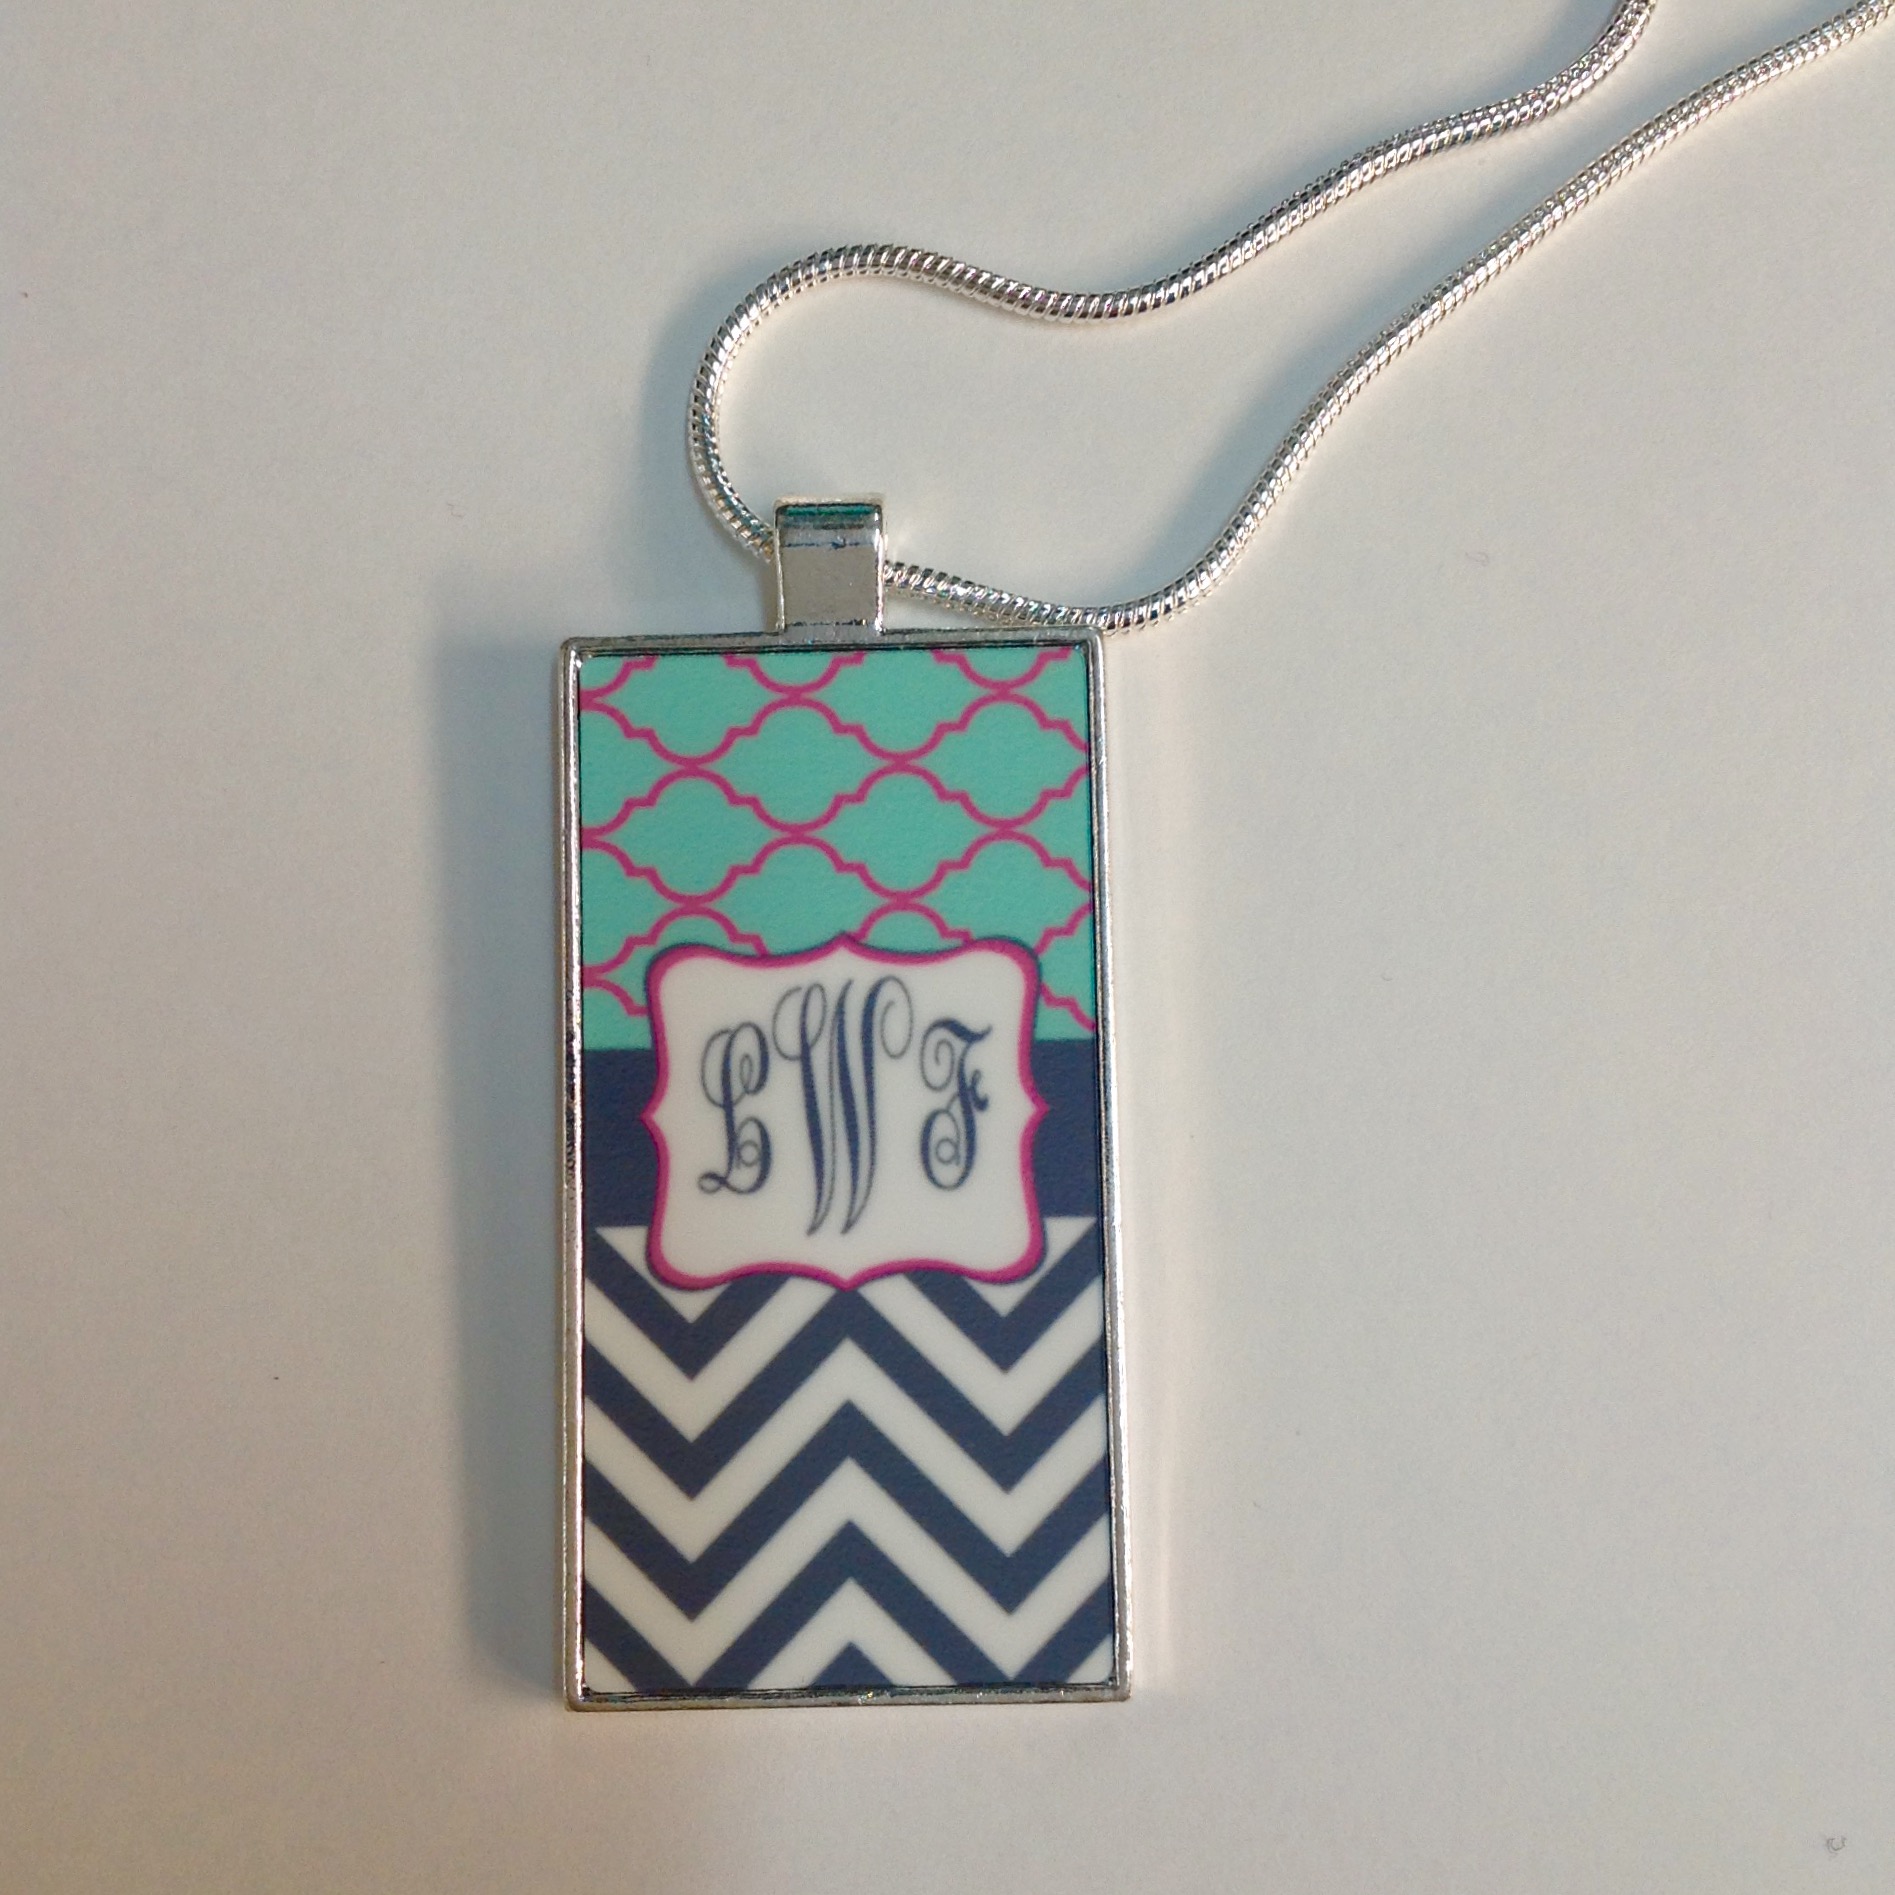 Necklace made with sublimation printing